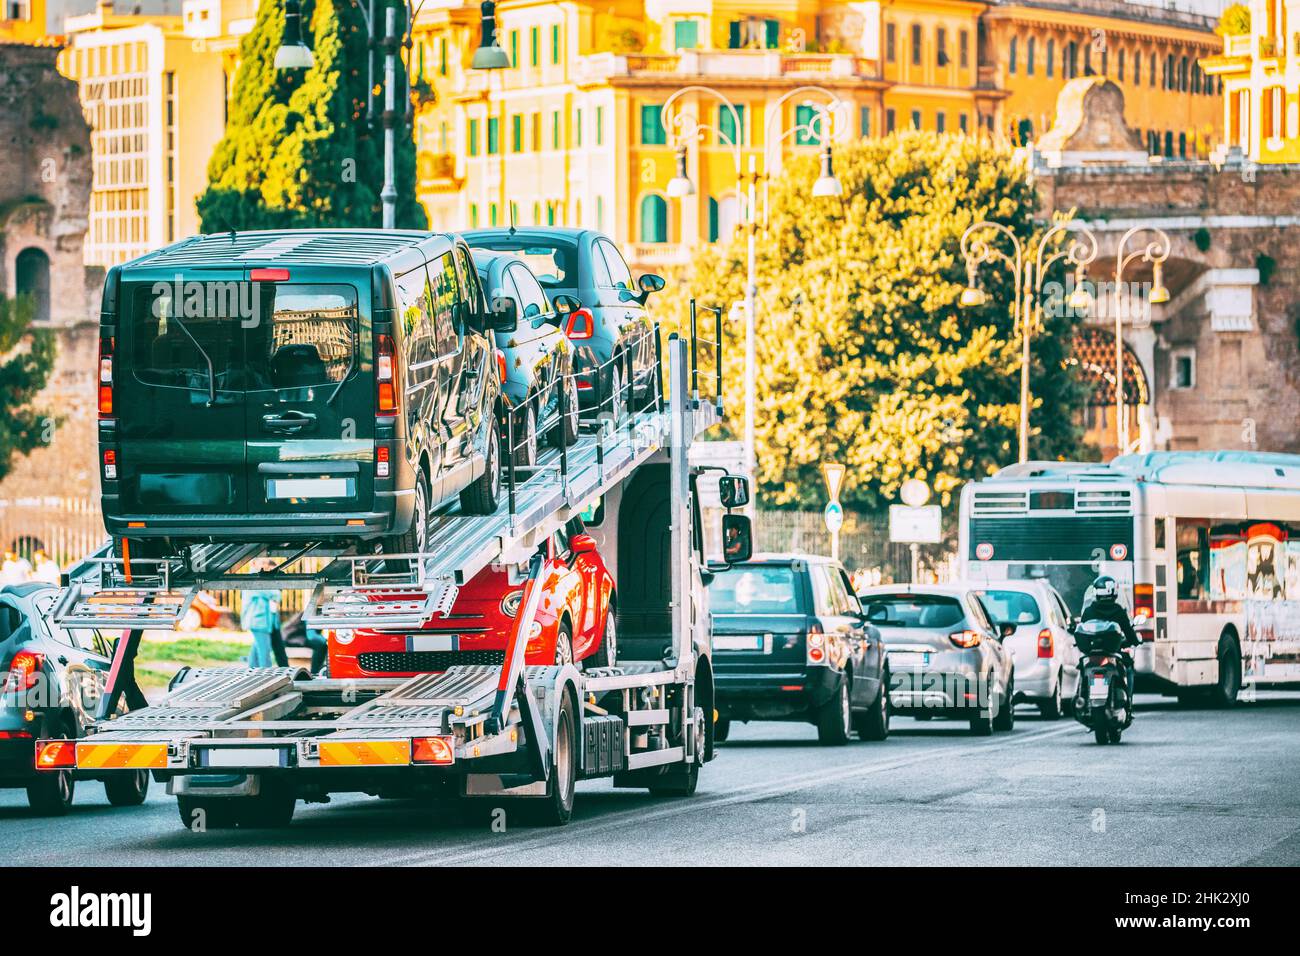 Auto-transport Carrying New Fiat Cars In European City Street. Auto Transport Broker Or Car Transporter. Auto-transport Carrying New Fiat Cars In City Stock Photo